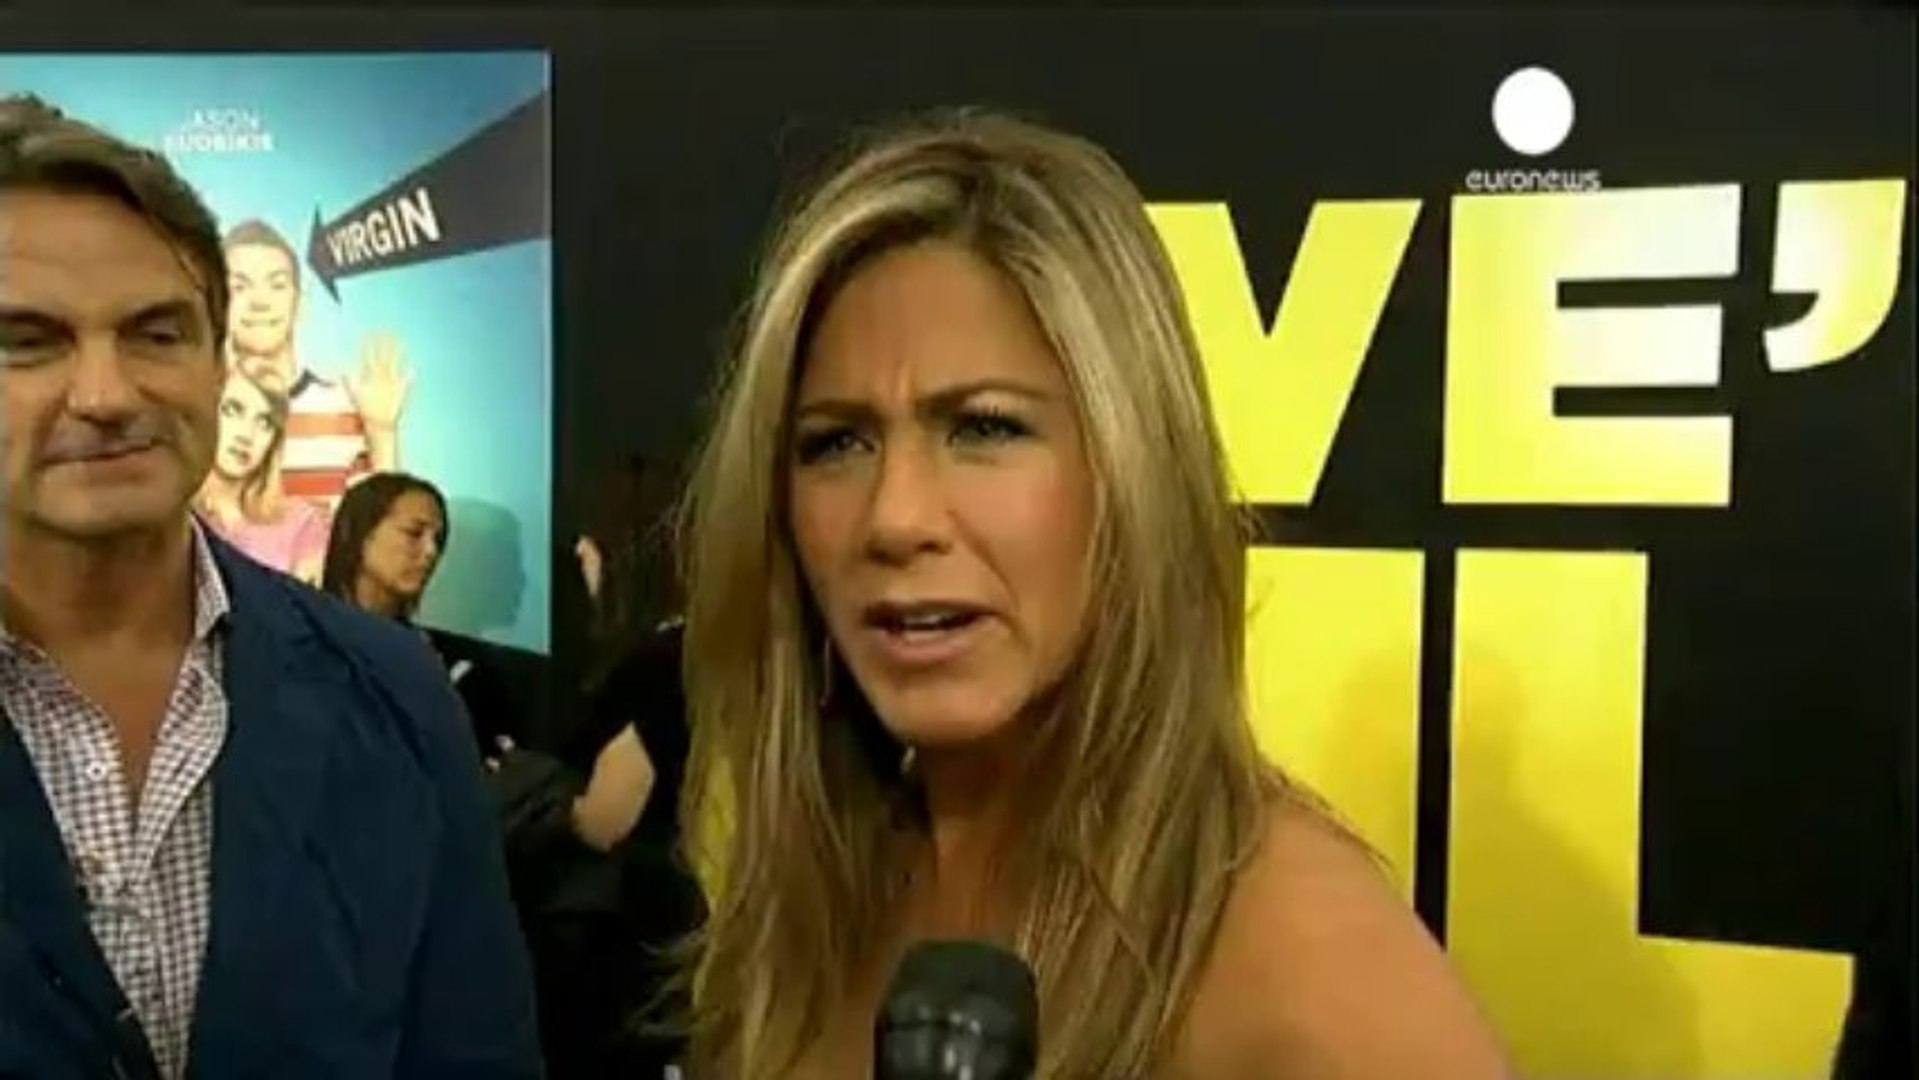 Jennifer Aniston embraces naughty humour in latest comedy